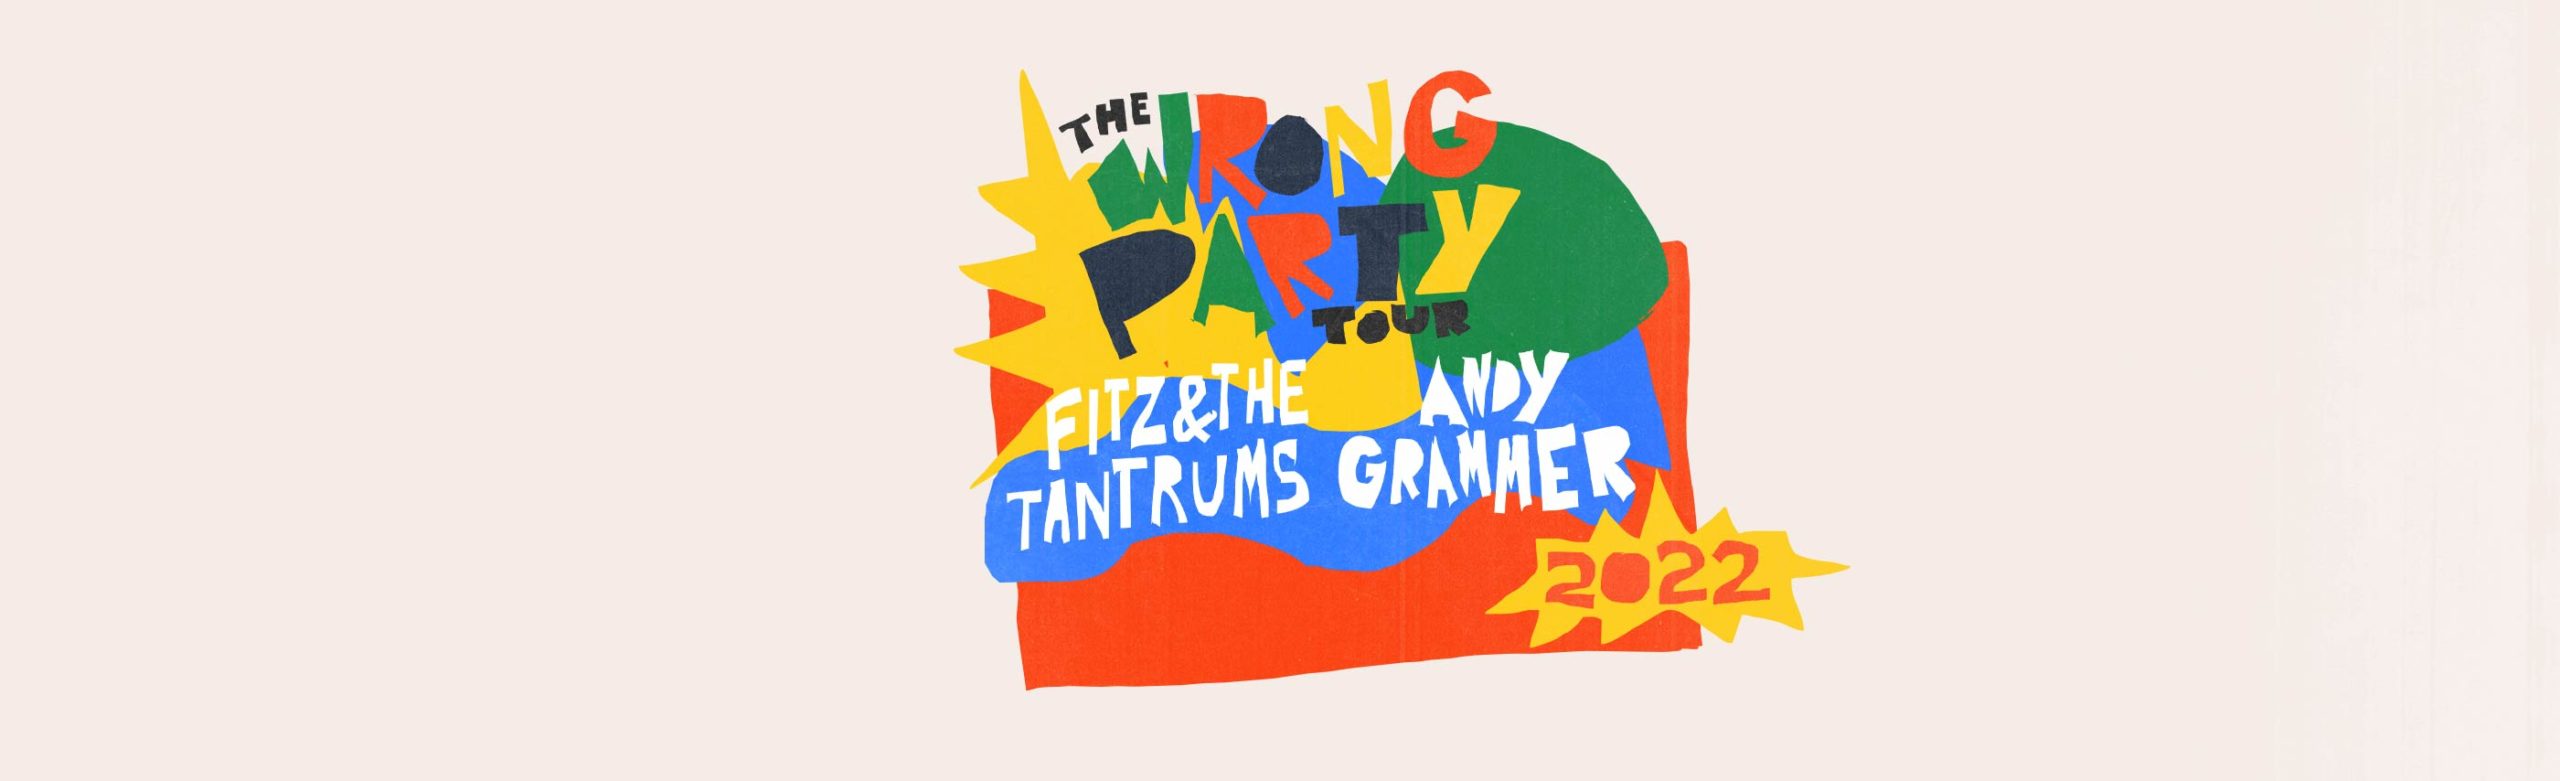 Fitz and the Tantrums and Andy Grammer